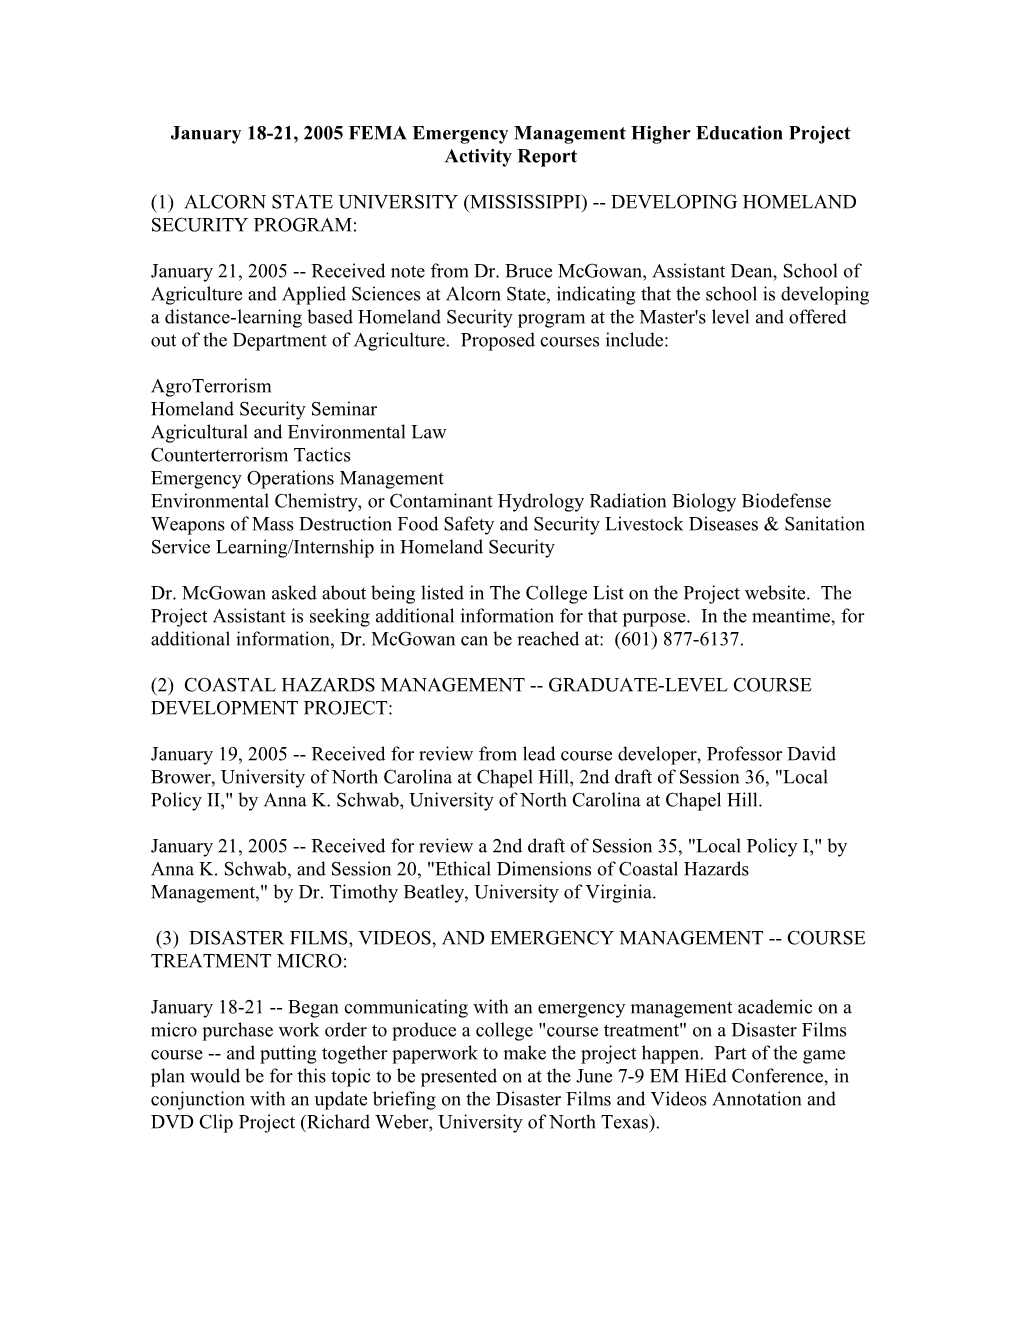 January 18-21, 2005 FEMA Emergency Management Higher Education Project Activity Report